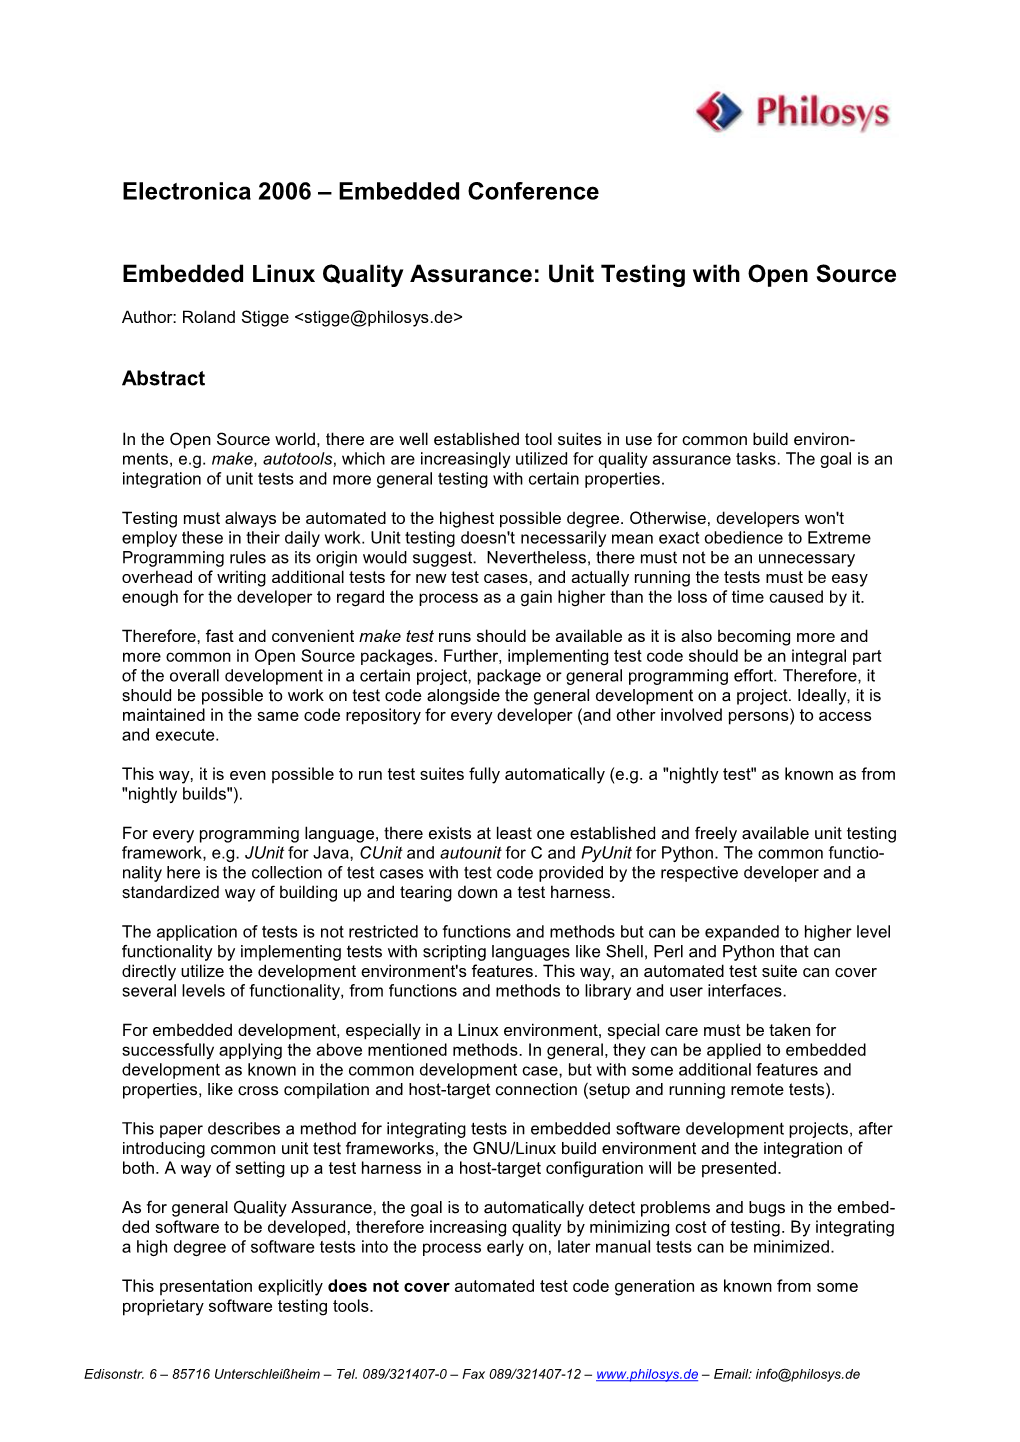 Embedded Linux Quality Assurance: Unit Testing with Open Source